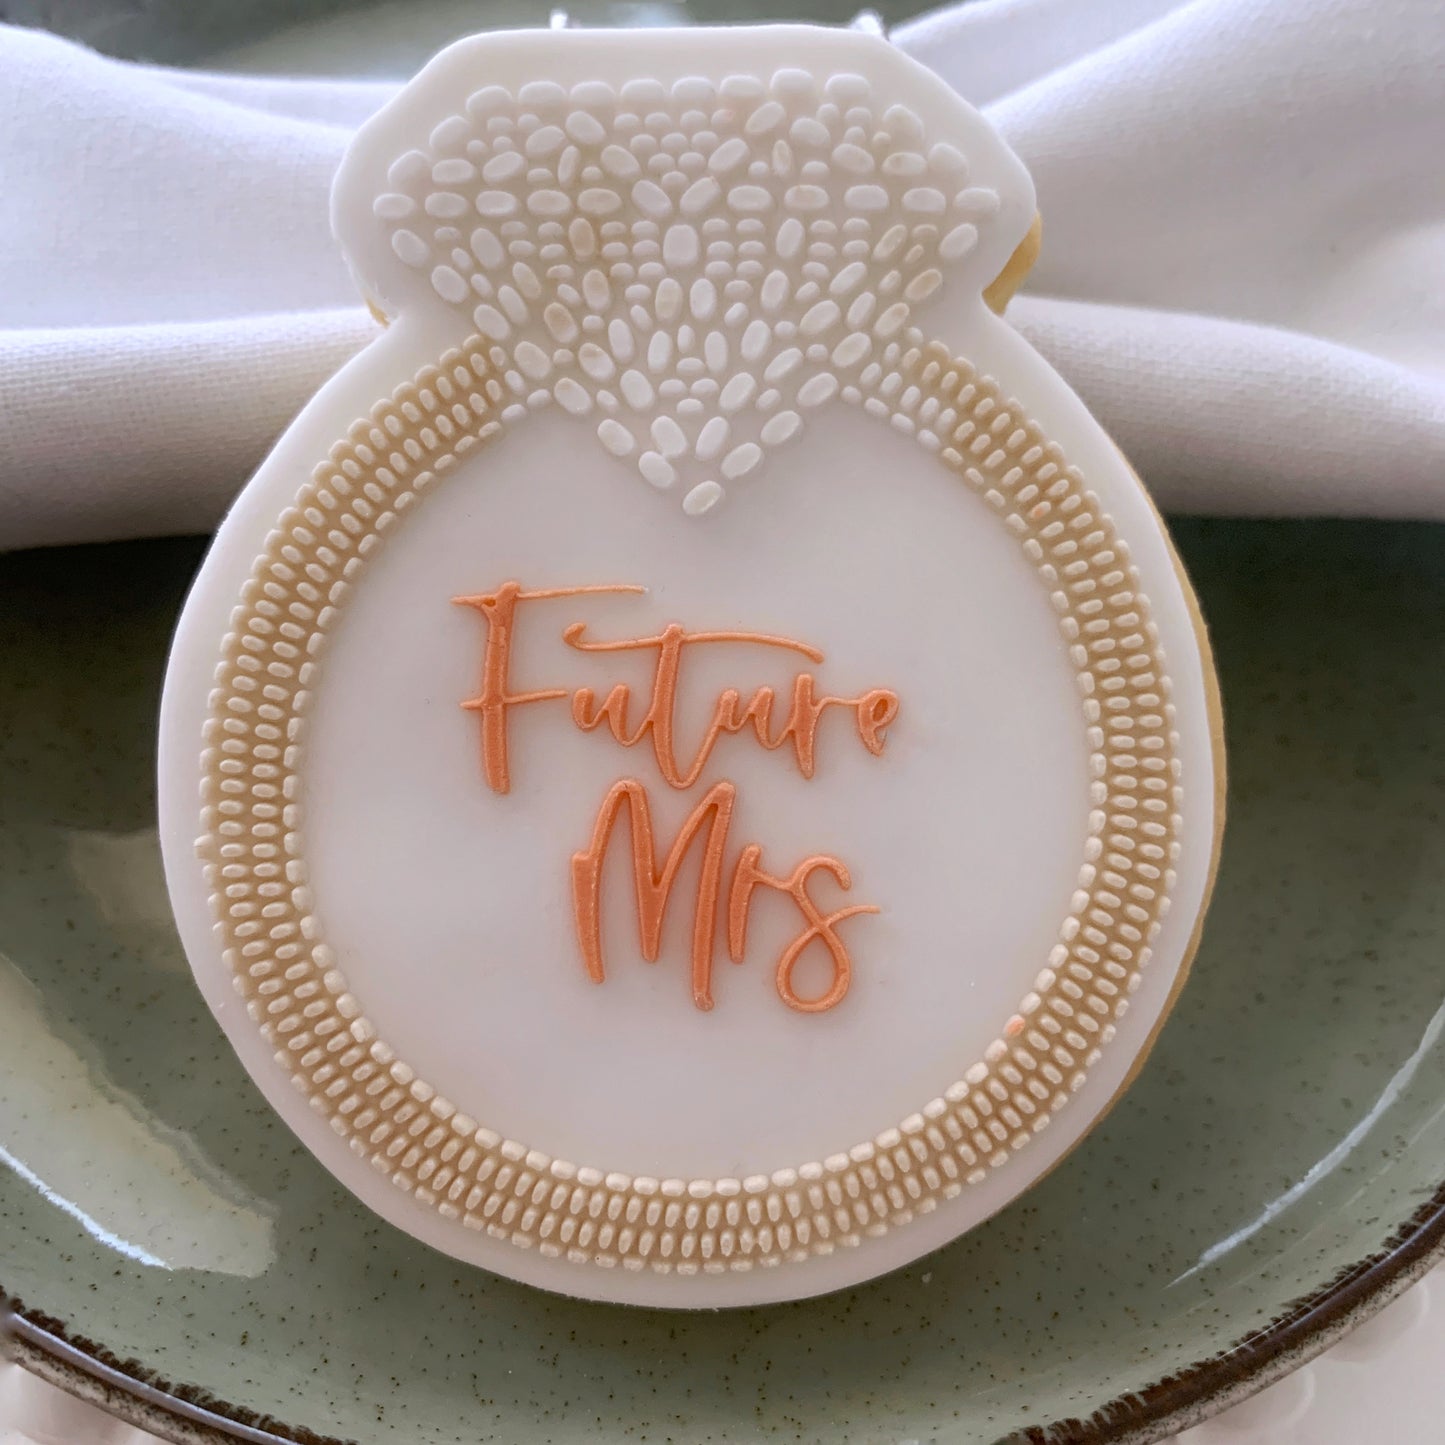 Future Mrs Beaded Diamond Ring Cookie Stamp & Cutter